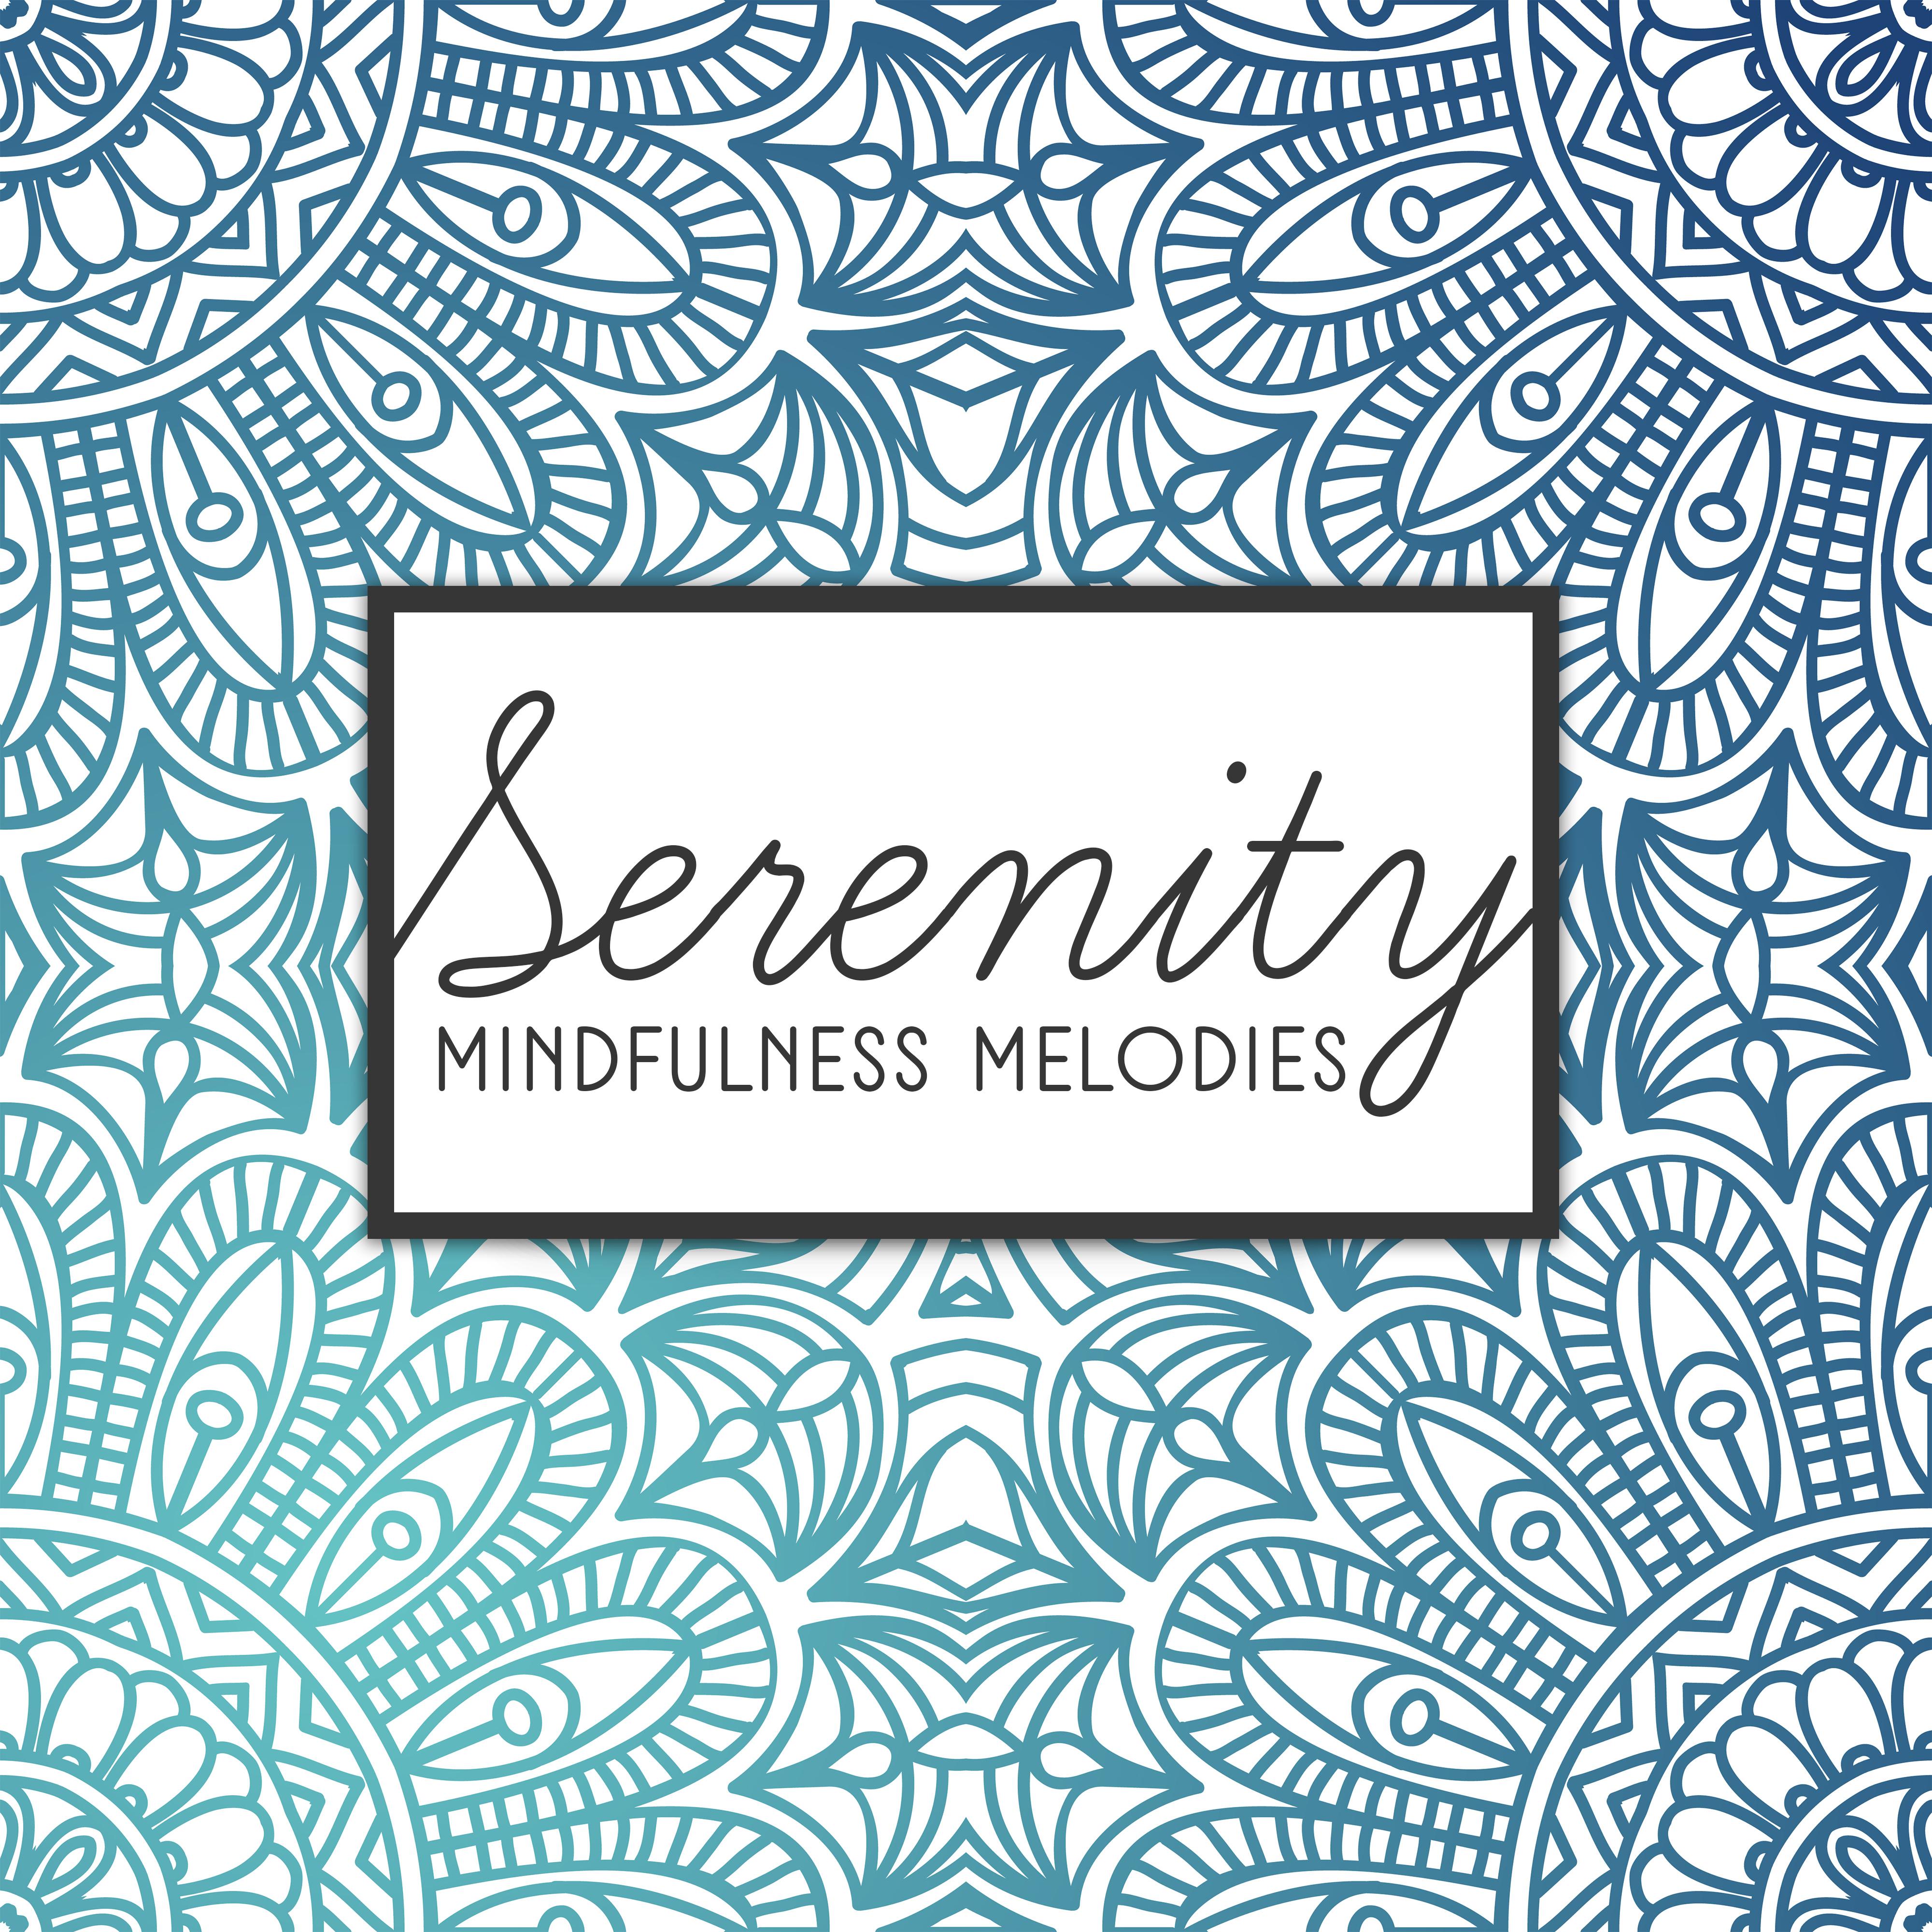 Serenity Mindfulness Melodies